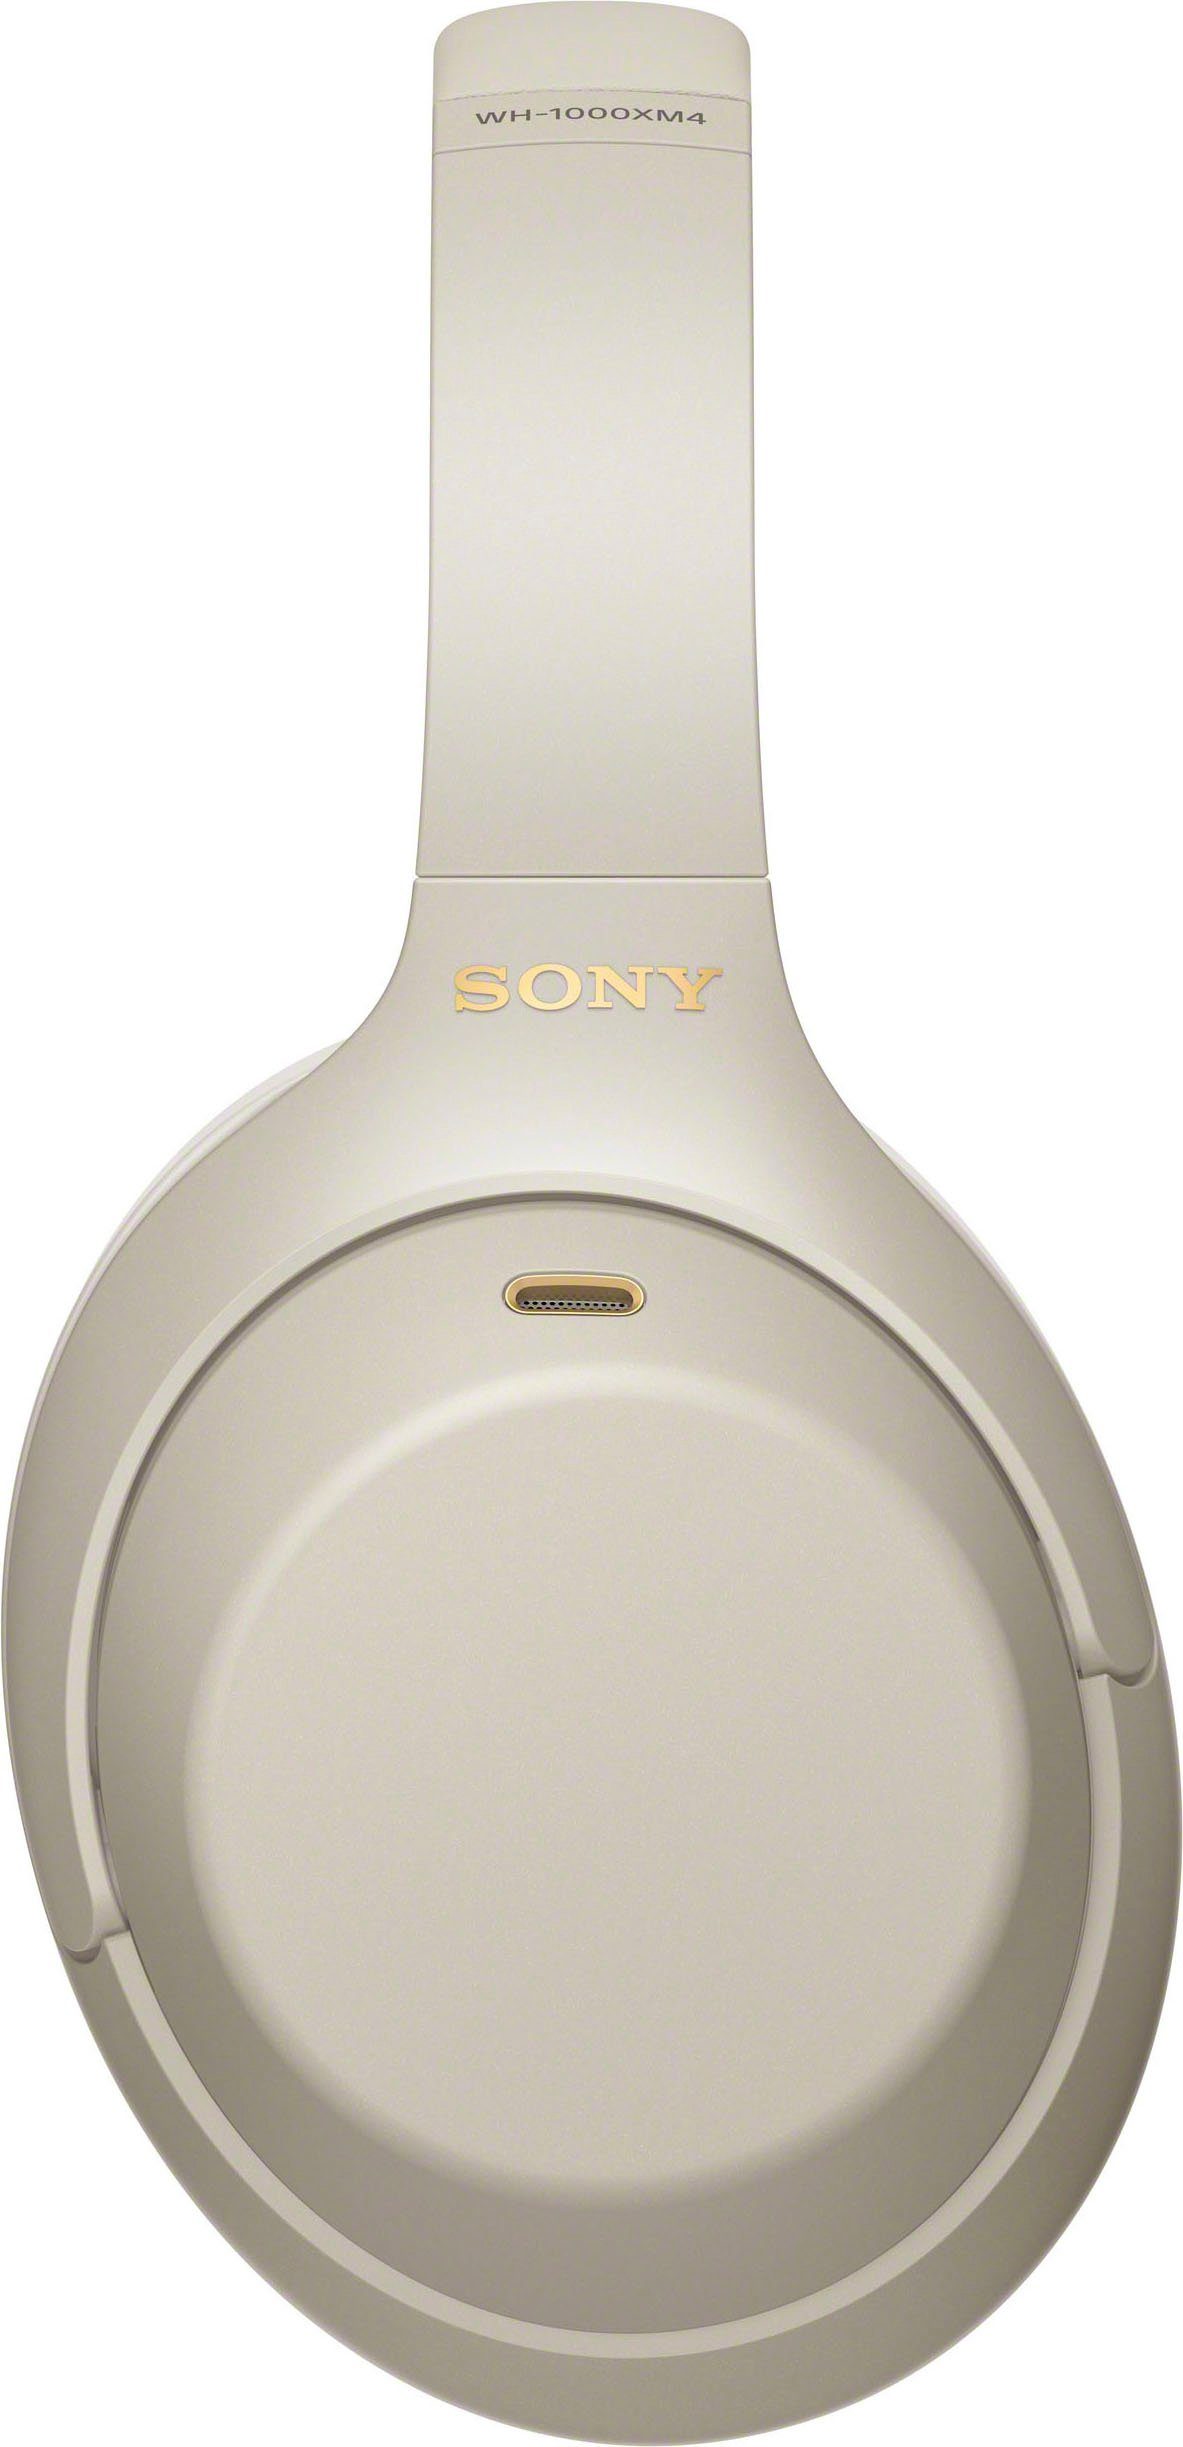 via kabelloser Silber Verbindung Sensor, Sony One-Touch Bluetooth, NFC, Schnellladefunktion) (Noise-Cancelling, Over-Ear-Kopfhörer NFC, WH-1000XM4 Touch